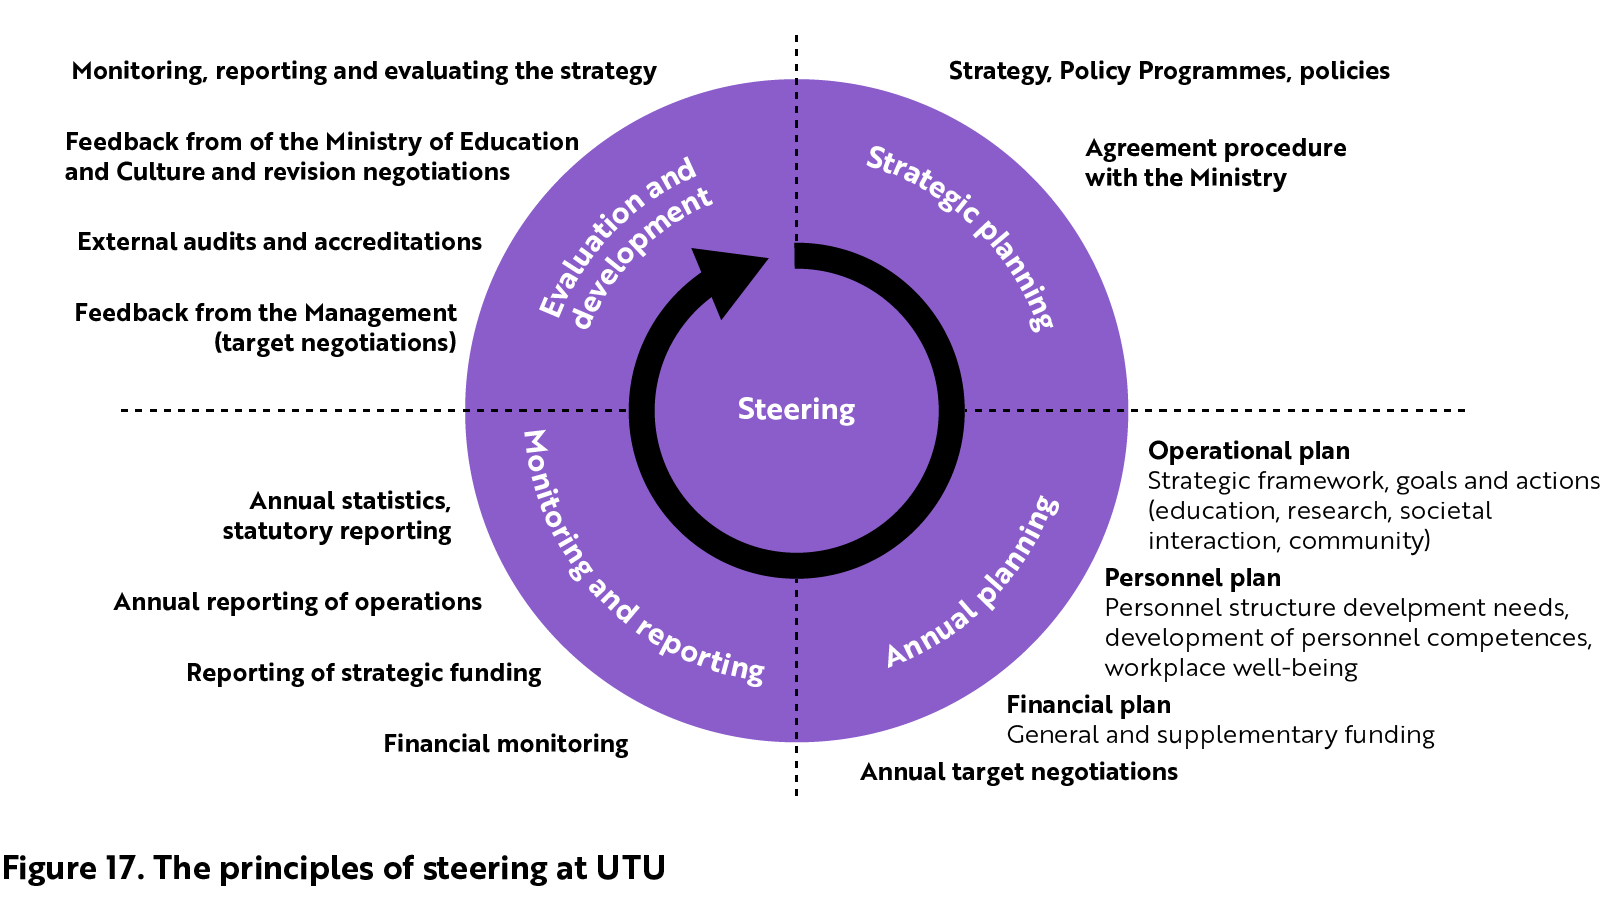 The principles of steering at UTU include strategic planning, annual planning, monitoring and reporting and evaluation and development. Strategic planning includes the strategy, the policy programme and other policies as well as the agreement procedure with the Ministry. Annual planning includes the operational plan, the personnel plan, the financial plan and the annual target negotiations. The operational plan includes strategic framework, goals and actions in education, research, societal interaction and community. The personnel plan describes development needs in personnel structure, development of personnel competence and workplace well-being. The financial plan includes general and supplementary funding. Monitoring and reporting includes annual statistic and statutory reporting, annual reporting of operations, reporting of strategic funding and financial monitoring. Evaluation and development include monitoring, reporting and evaluating the strategy, feedback from the ministry of education and culture and revision negotiations, external audits and accreditations and feedback from the management (target negotiations).